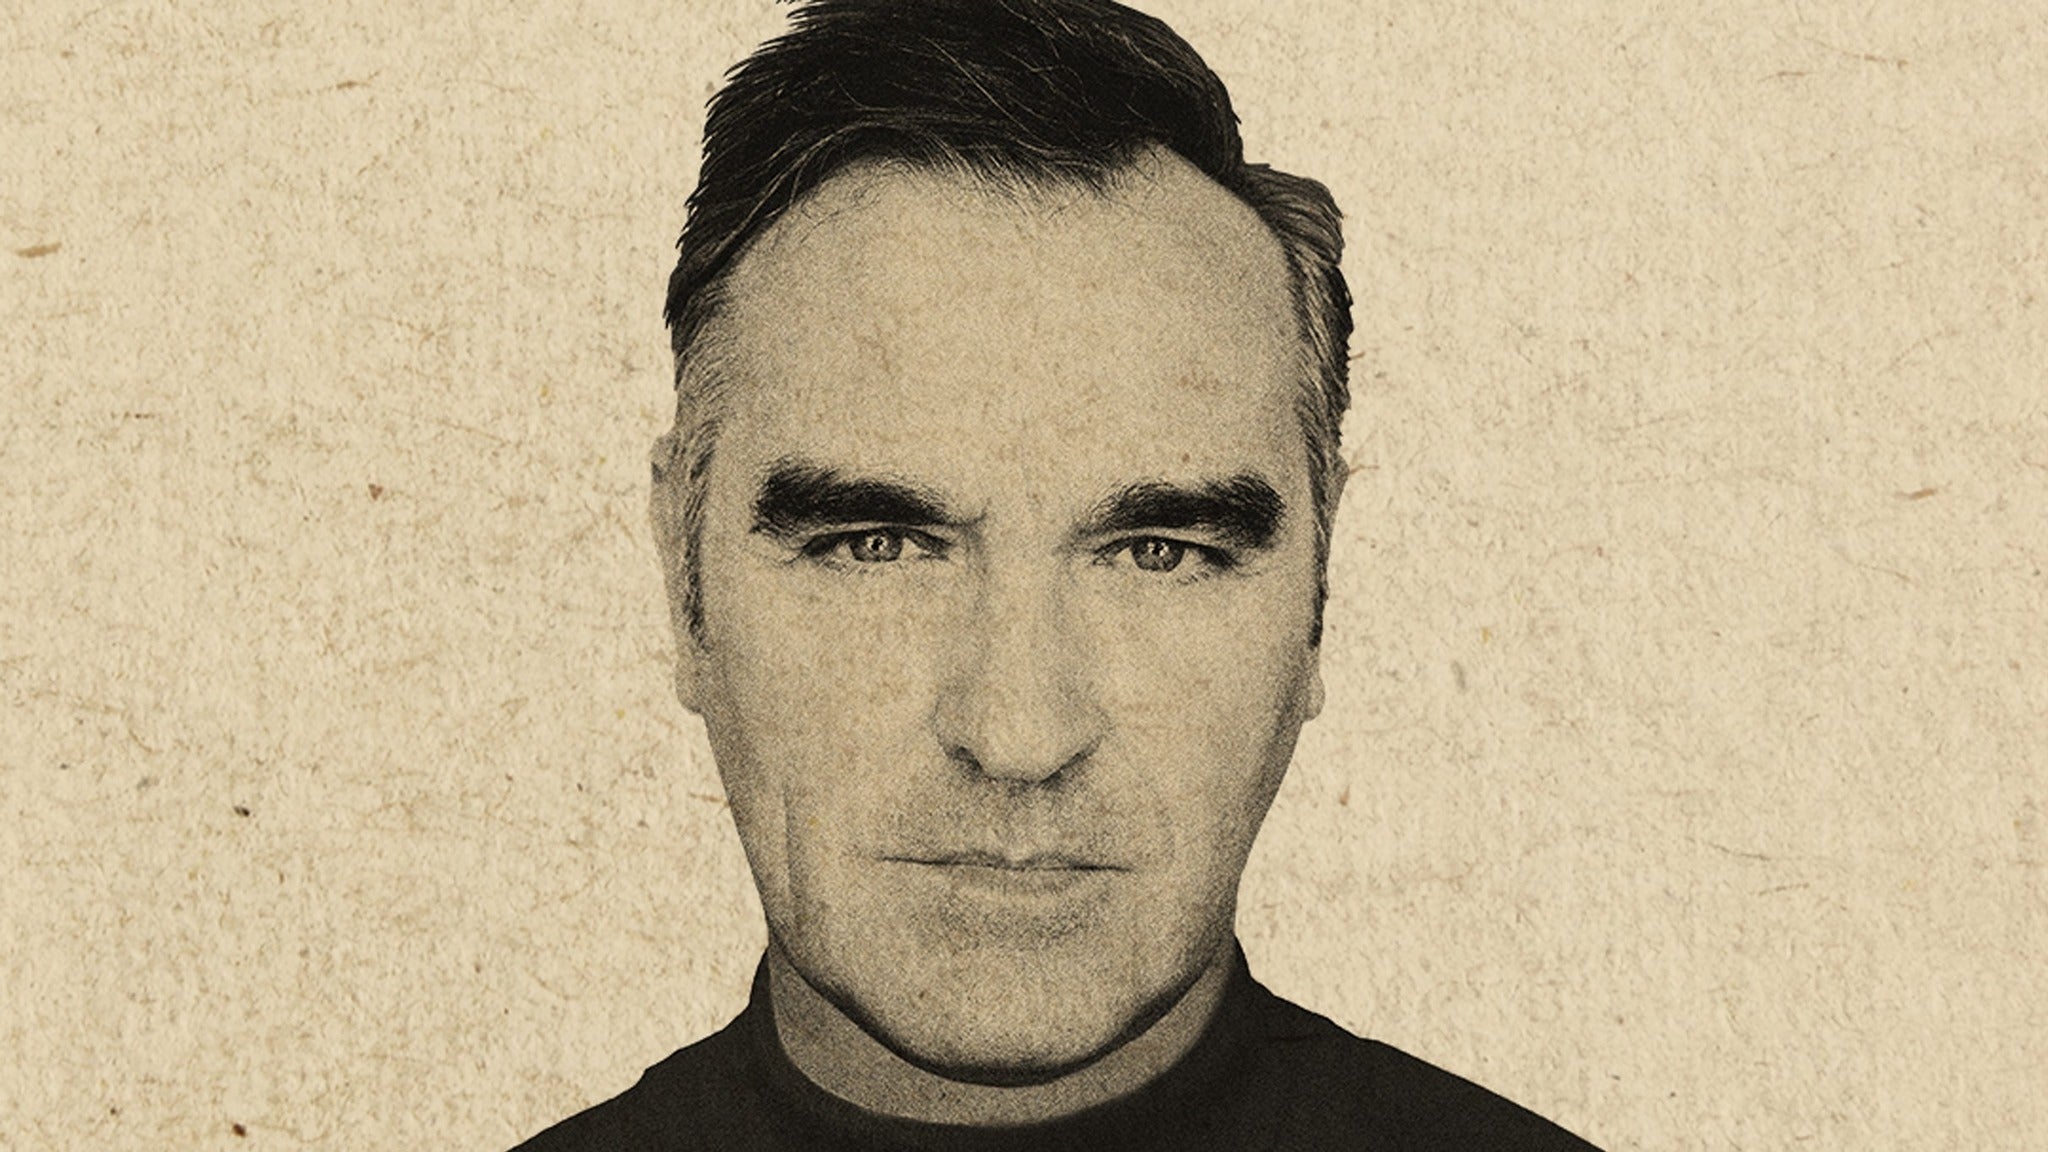 Image used with permission from Ticketmaster | Morrissey tickets